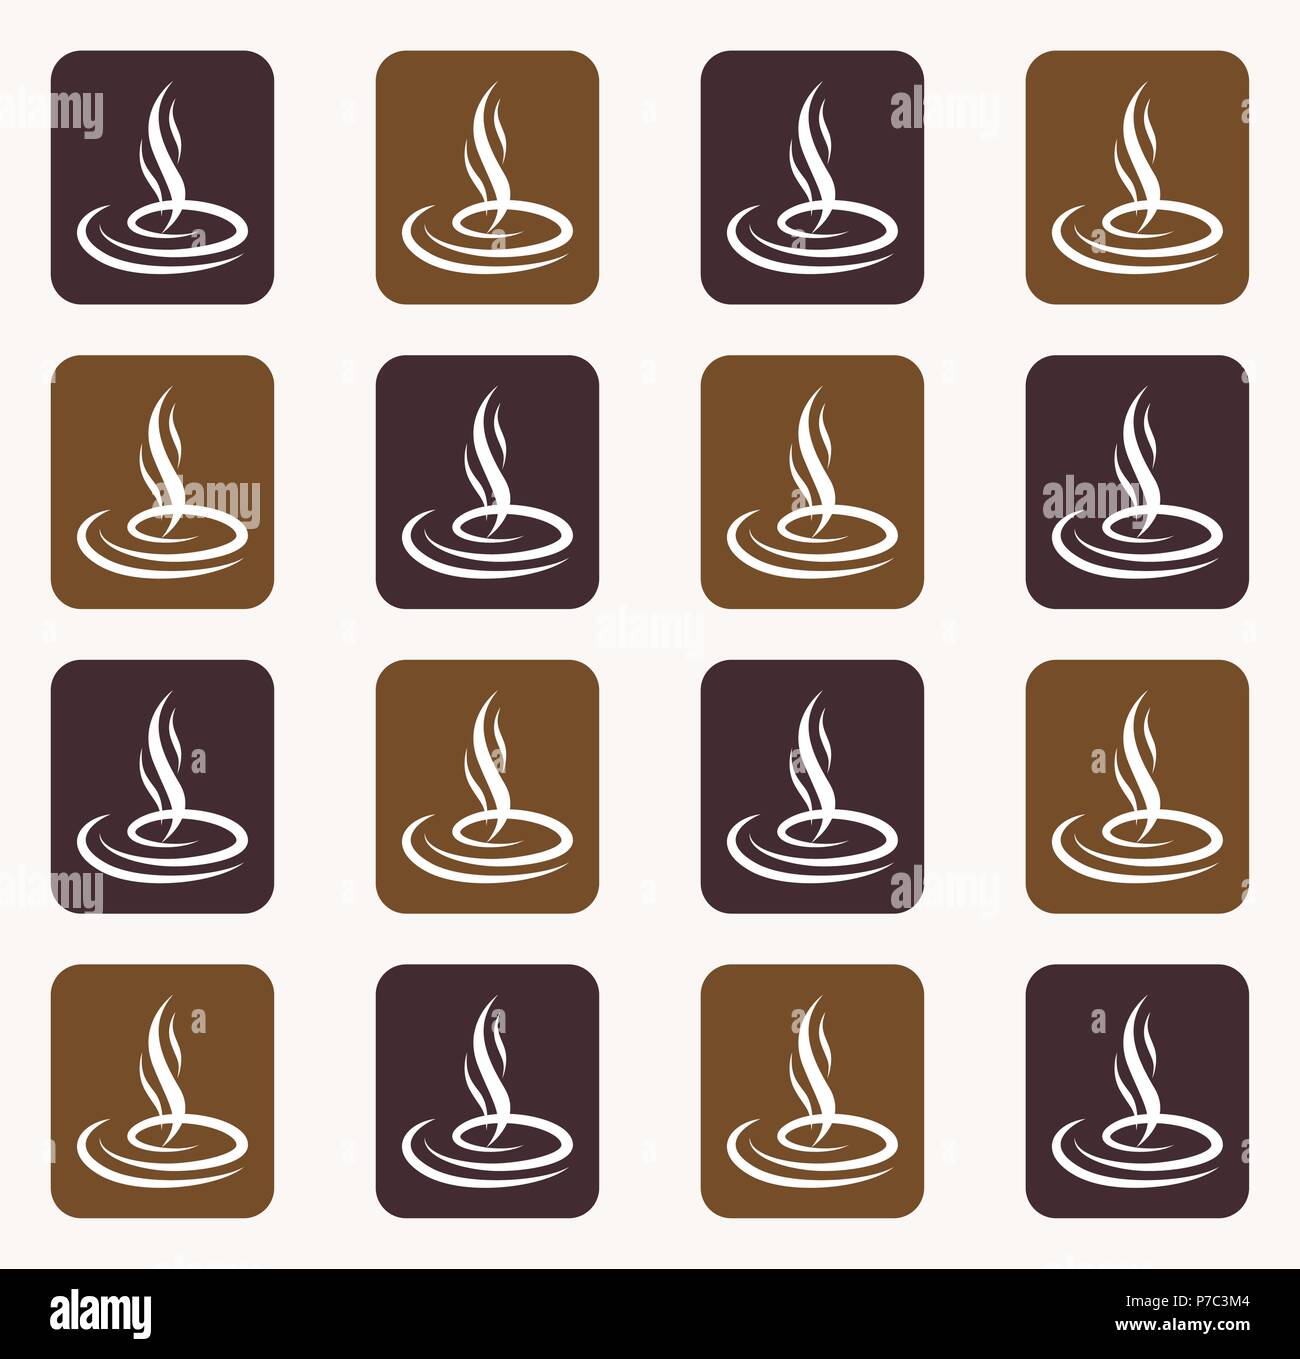 Seamless pattern with steaming silhouettes over coffee cup.Seamless pattern background. Stock Vector